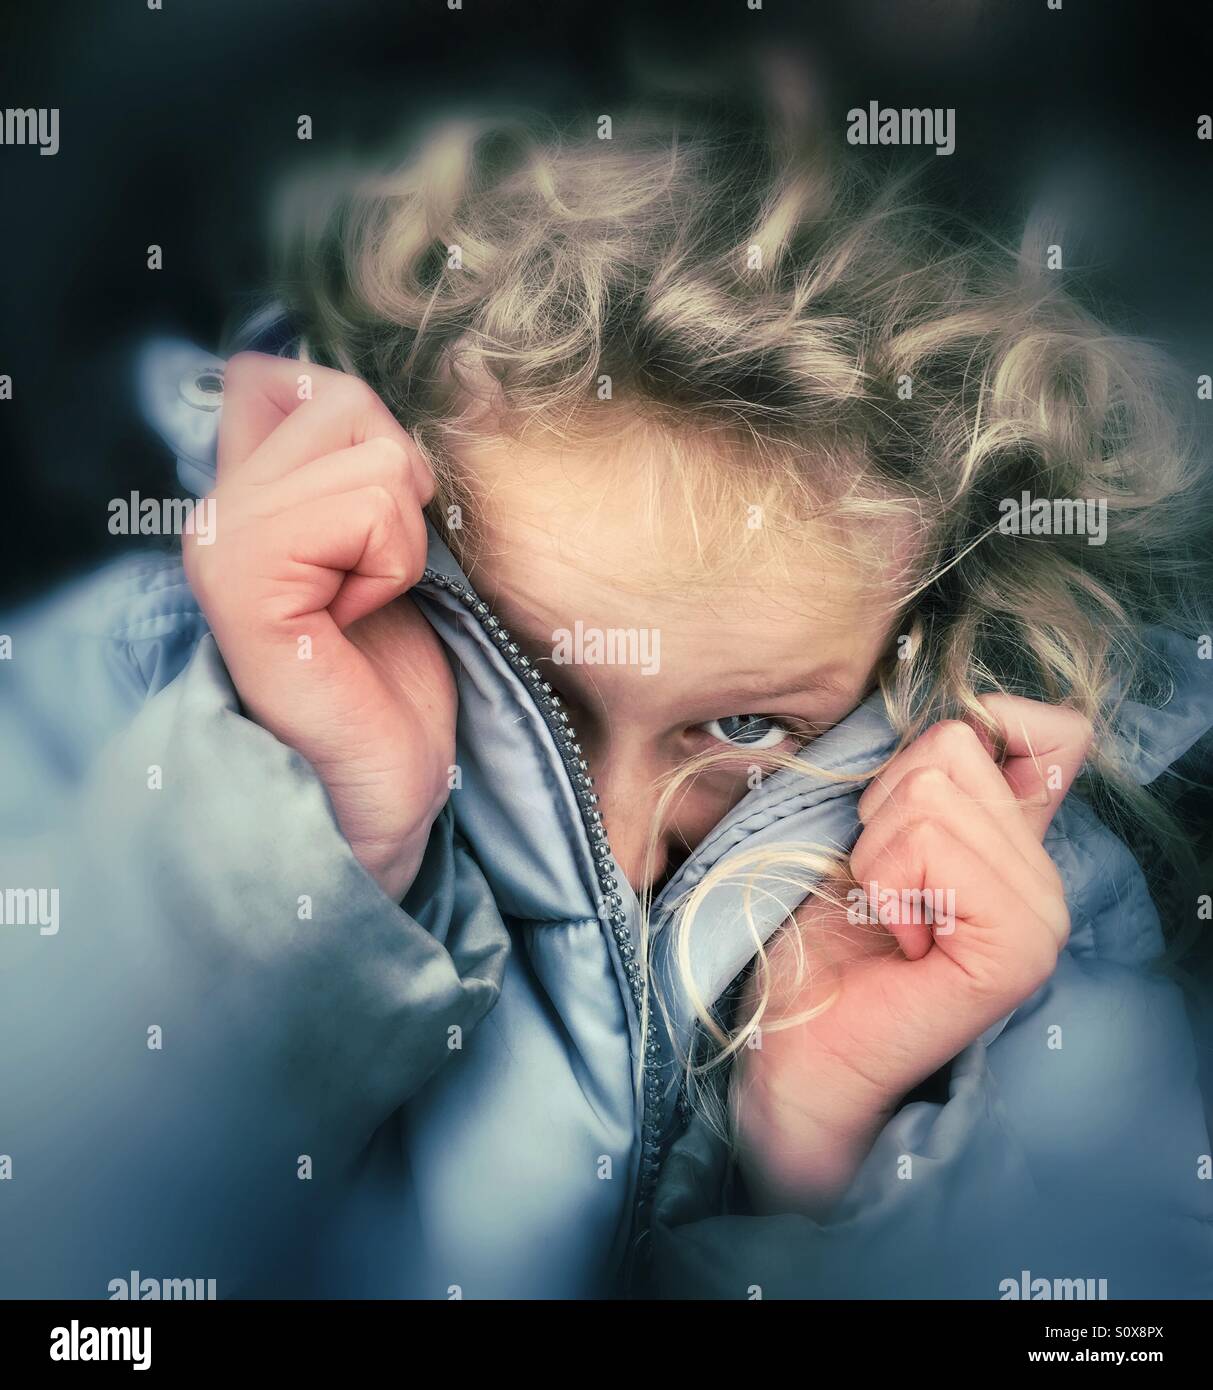 Young girl peering out from her warm winter coat Stock Photo